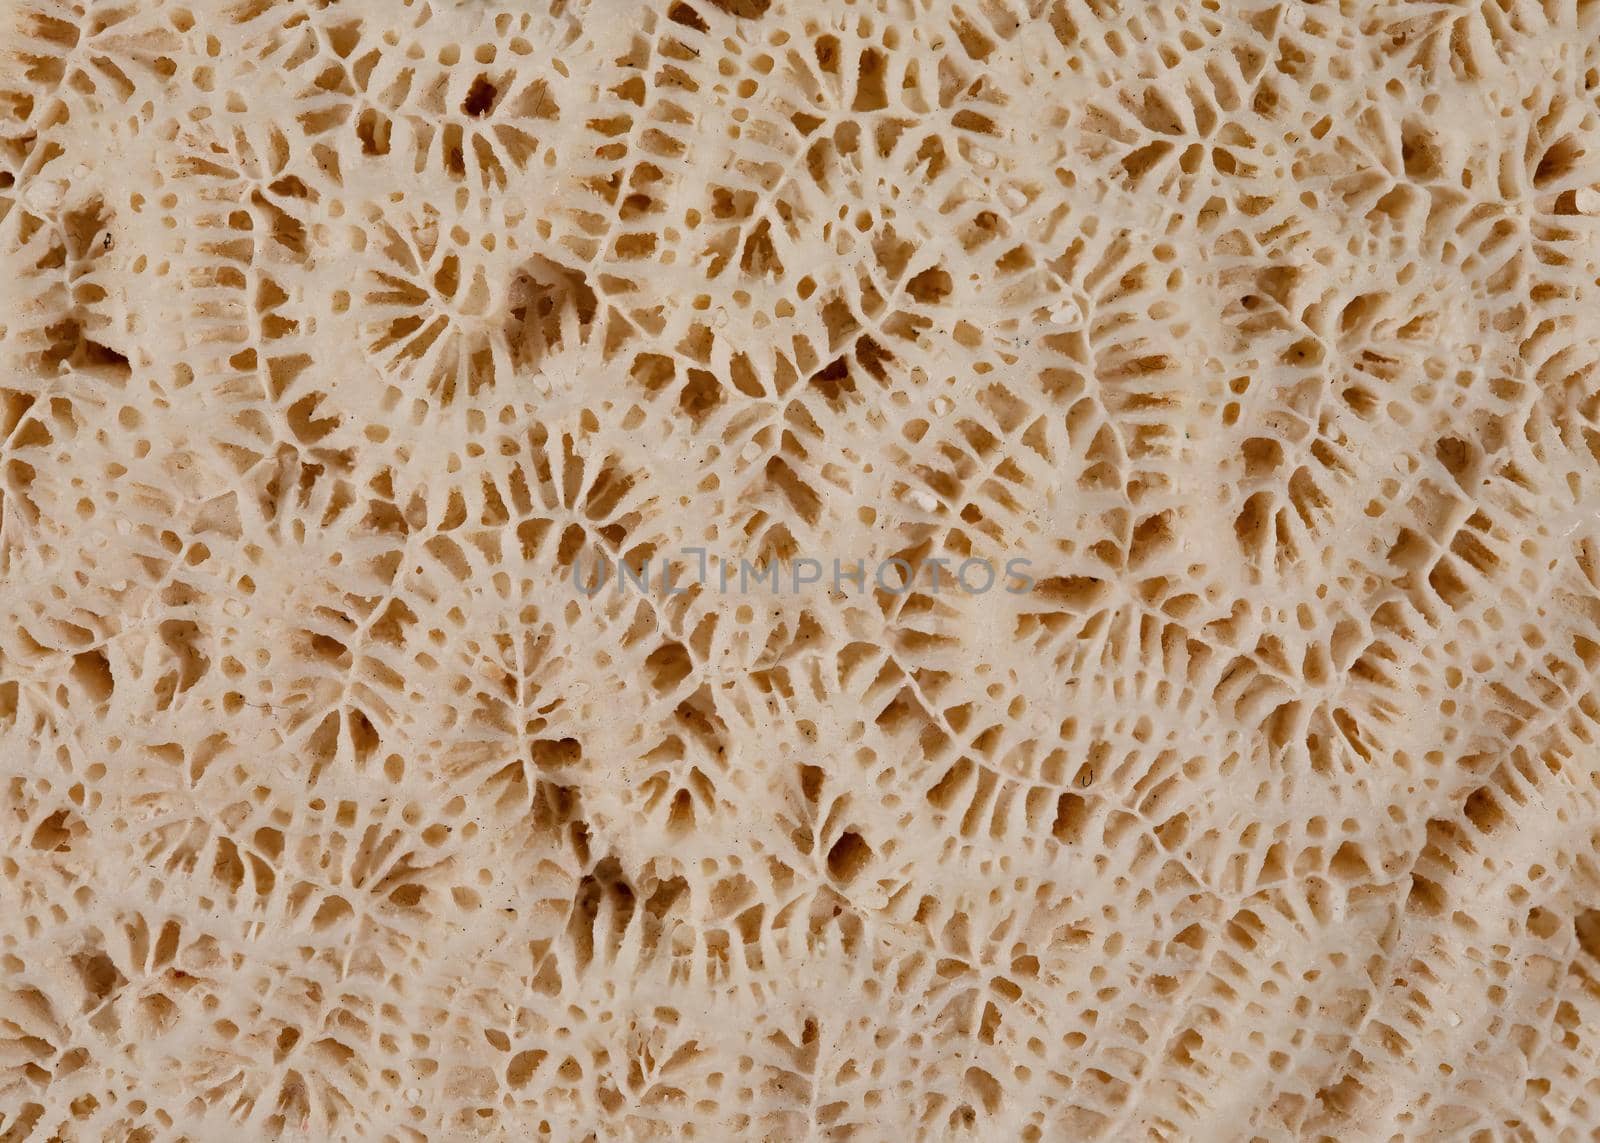 Macro view of the details of the ridges and valleys of a brain coral (diploria).